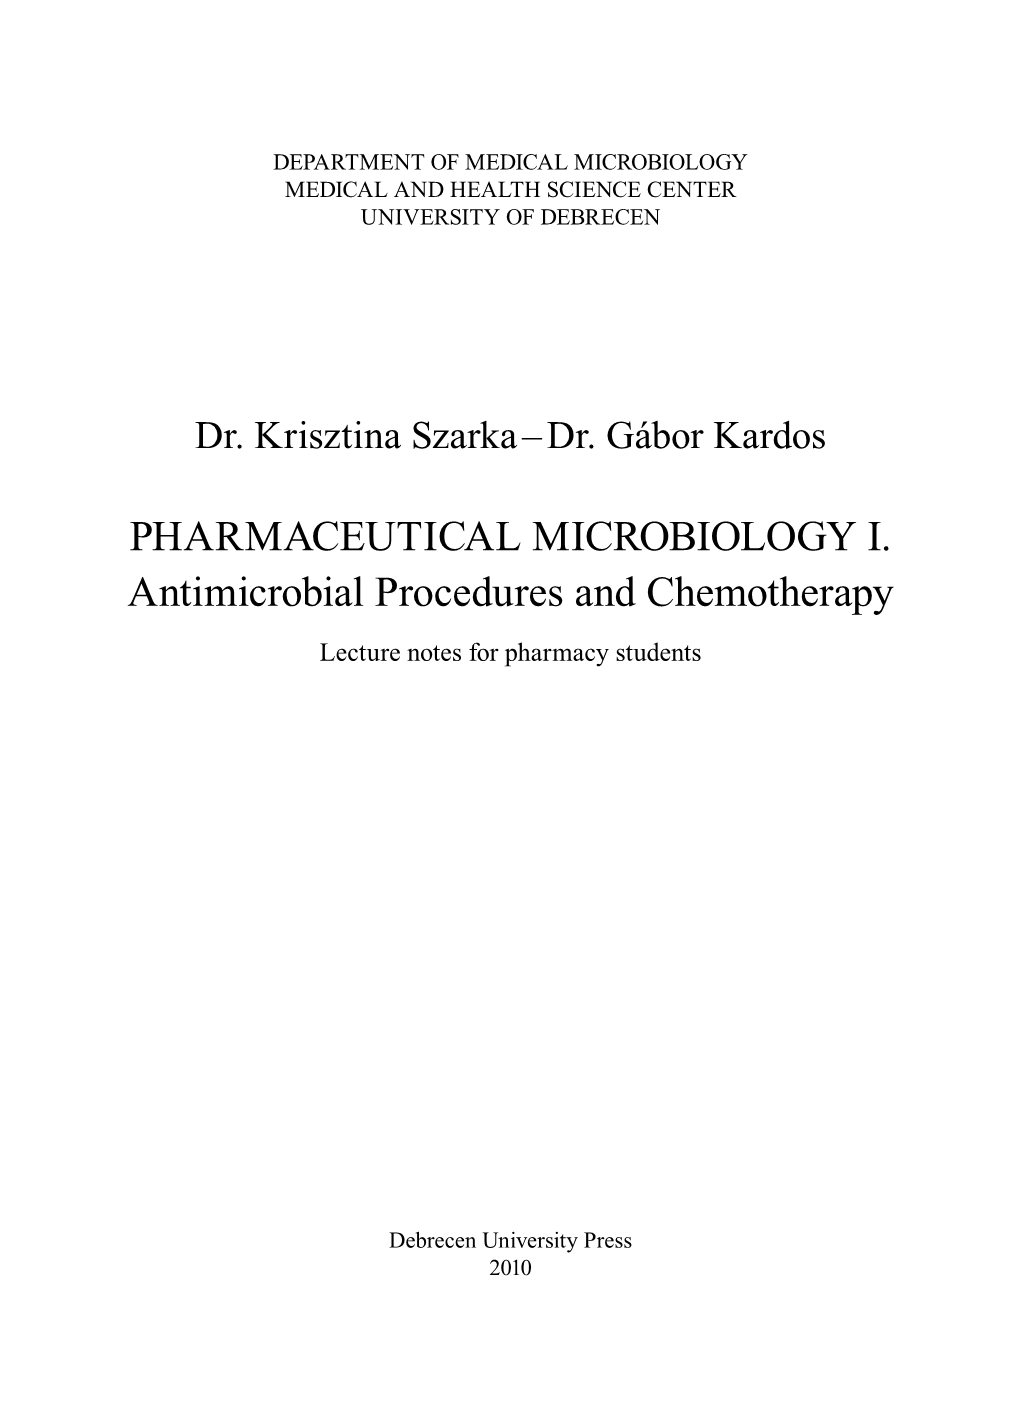 Pharmaceutical Microbiology I. Antimicrobial Procedures and Chemotherapy Lecture Notes for Pharmacy Students